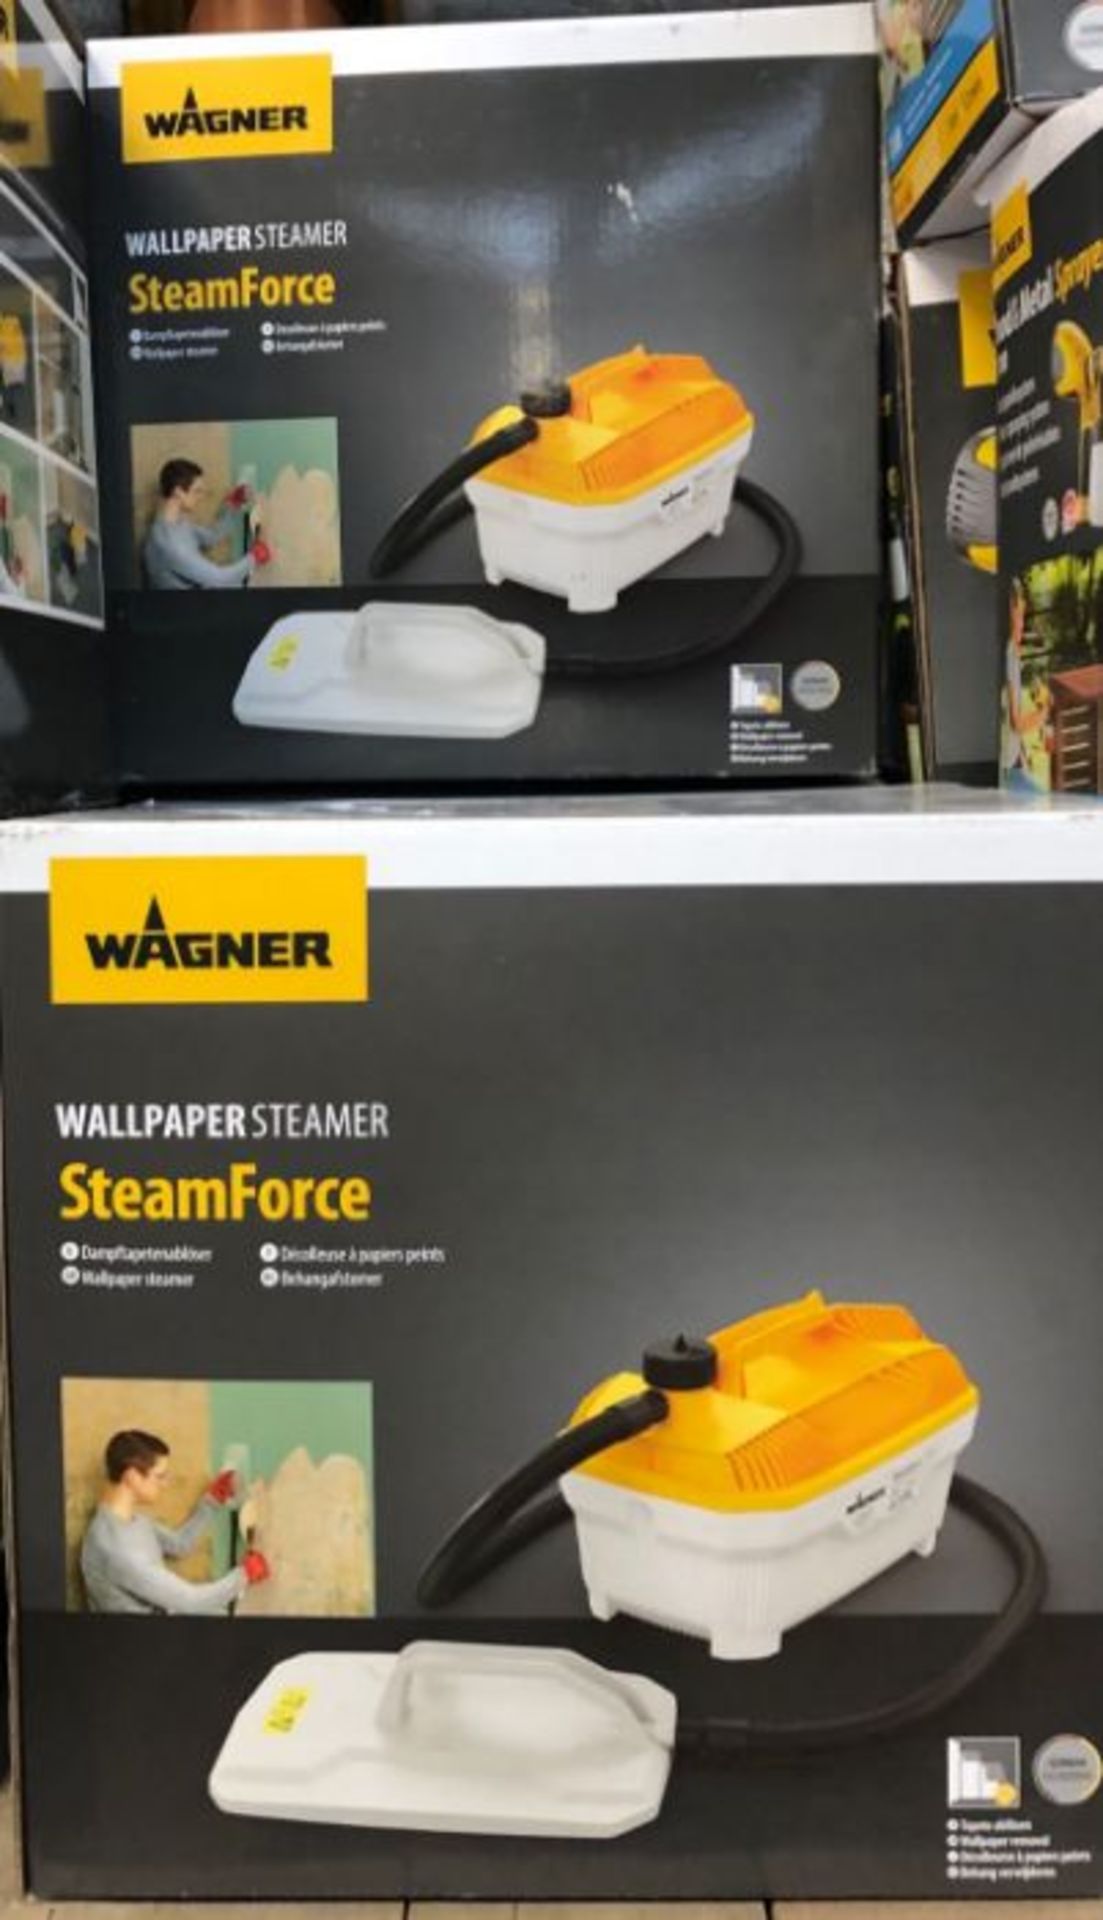 3 X WAGNER STEAMFORCE WALLPAPER STEAMER / COMBINED RRP £119.97 / UNTESTED CUSTOMER RETURNS